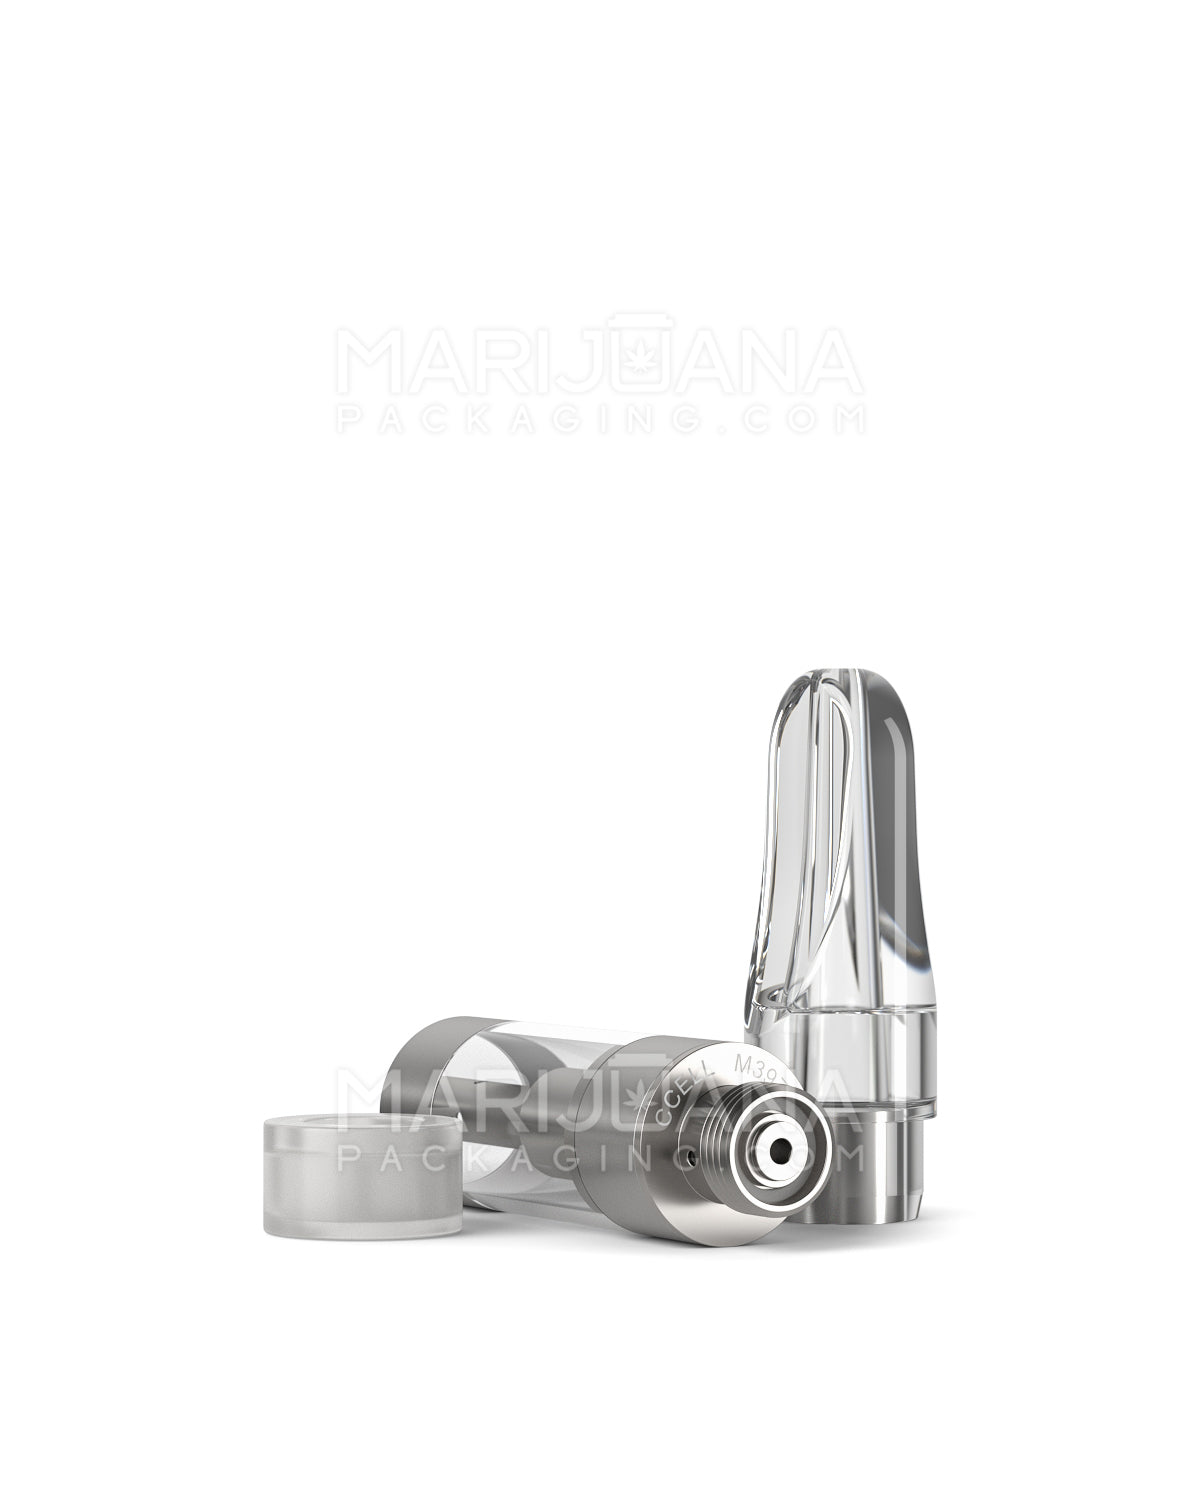 CCELL | Liquid6 Reactor Plastic Vape Cartridge with Clear Plastic Mouthpiece | 0.5mL - Press On - 100 Count - 8